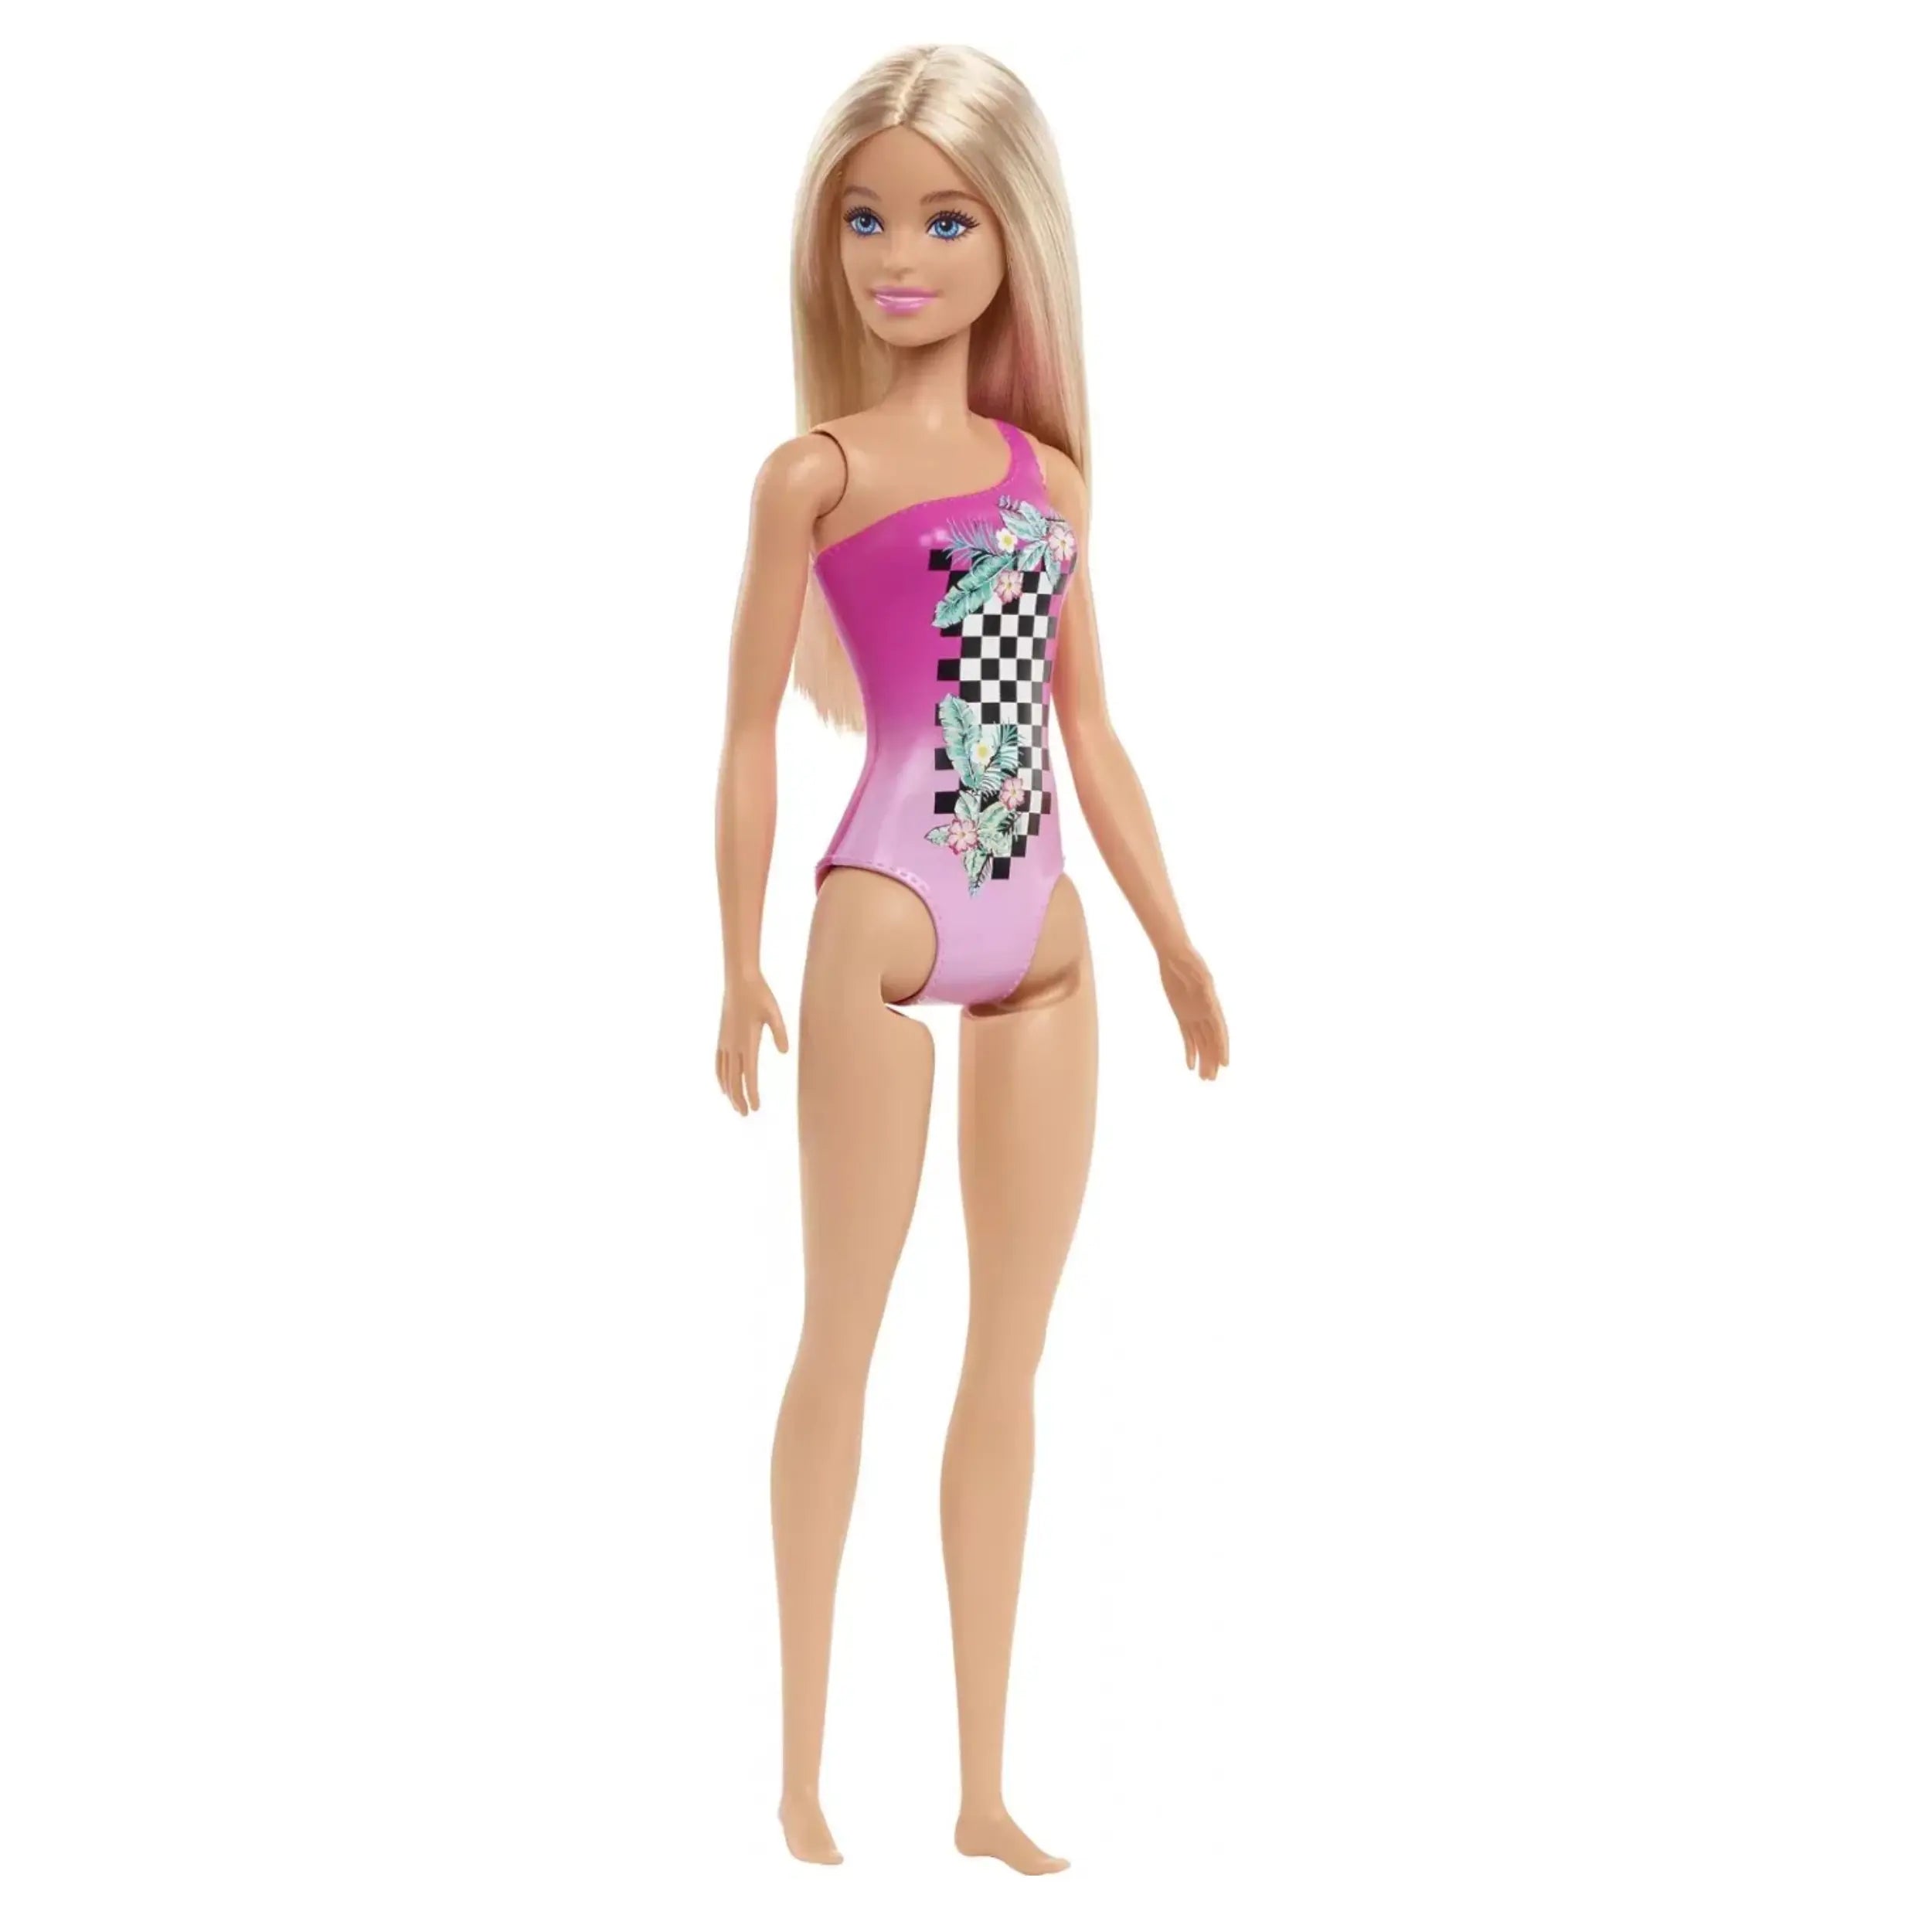 Barbie at the beach Tapestry